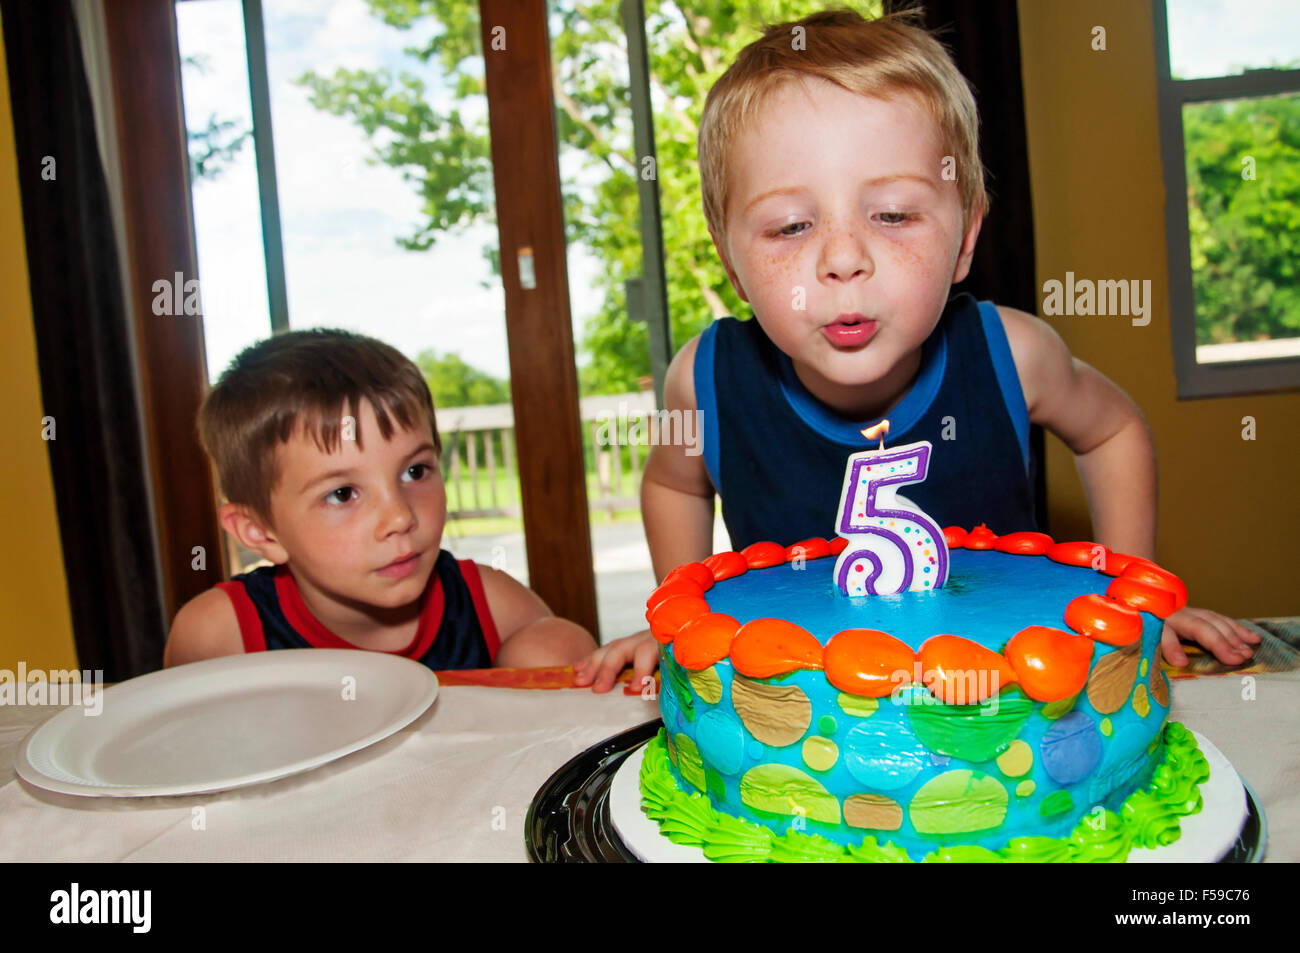 Boy blows out birthday candle on cake Stock Photo